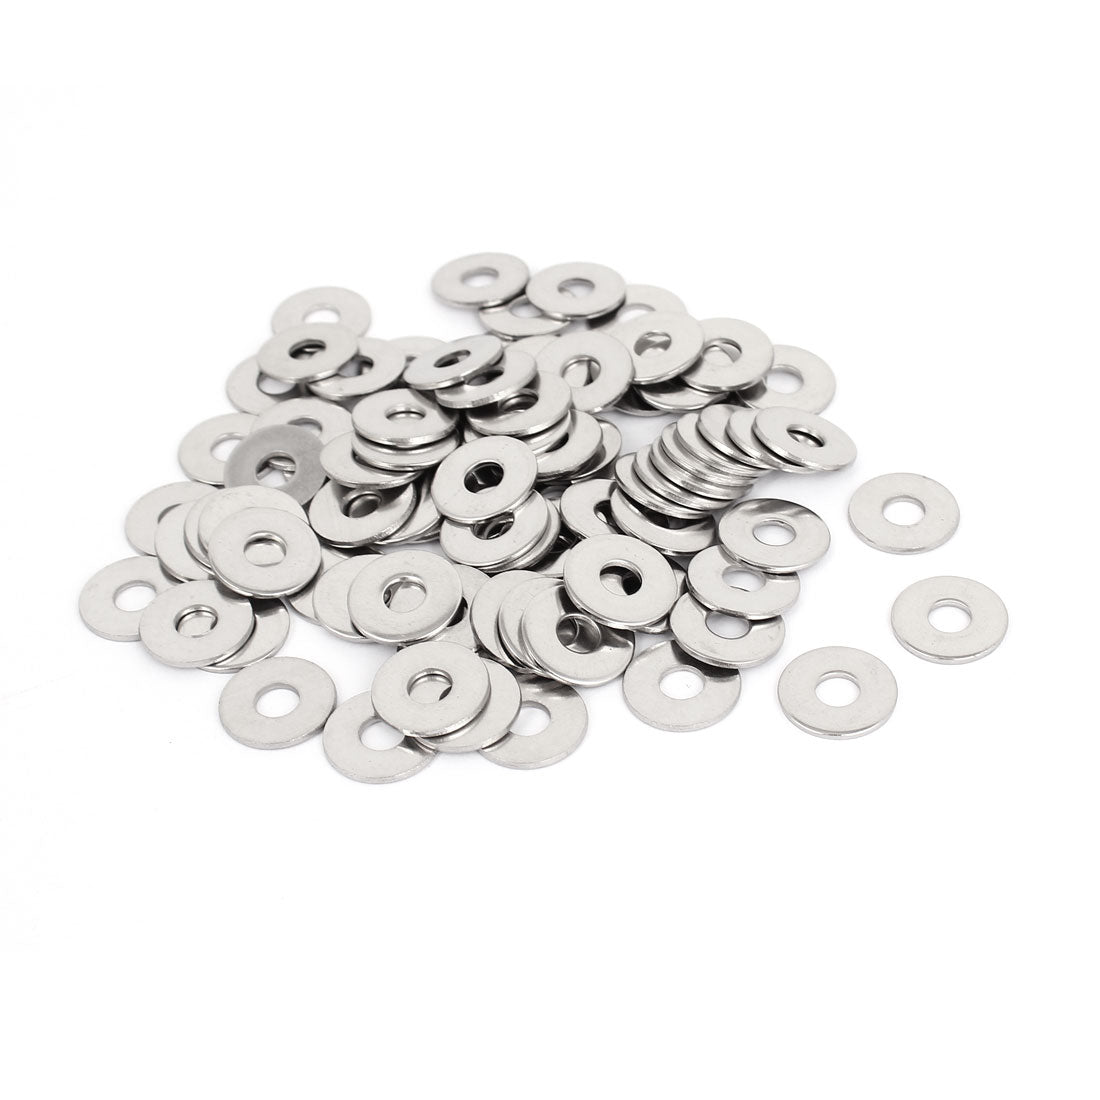 uxcell Uxcell 100Pcs M6x18mmx1.5mm Stainless Steel Metric Round Flat Washer for Bolt Screw